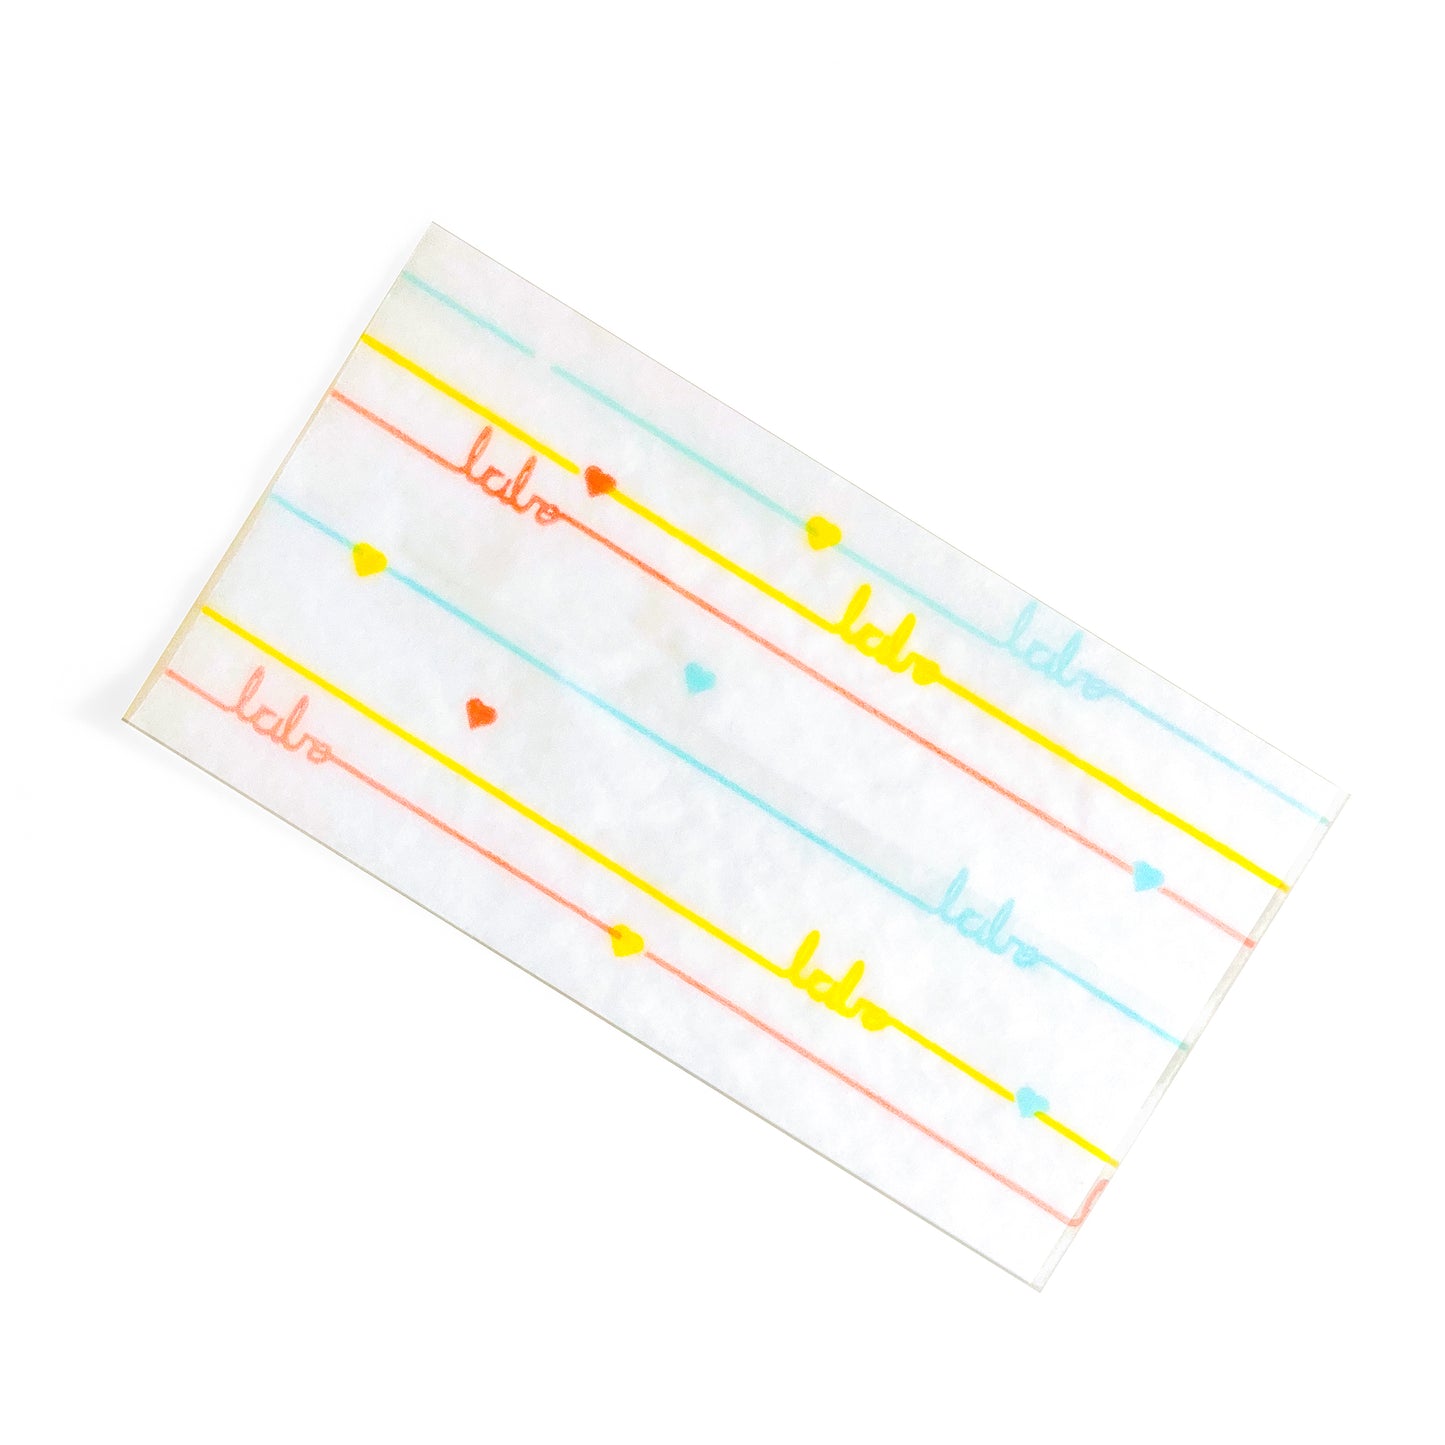 The Postscript Papers, set of 10: "babe" and heart adorned rolling papers. These designer rolling papers are girly, pretty, vegan, cute, cool, standard size, high quality, even burn, natural dyes, best tasting, slow burn.